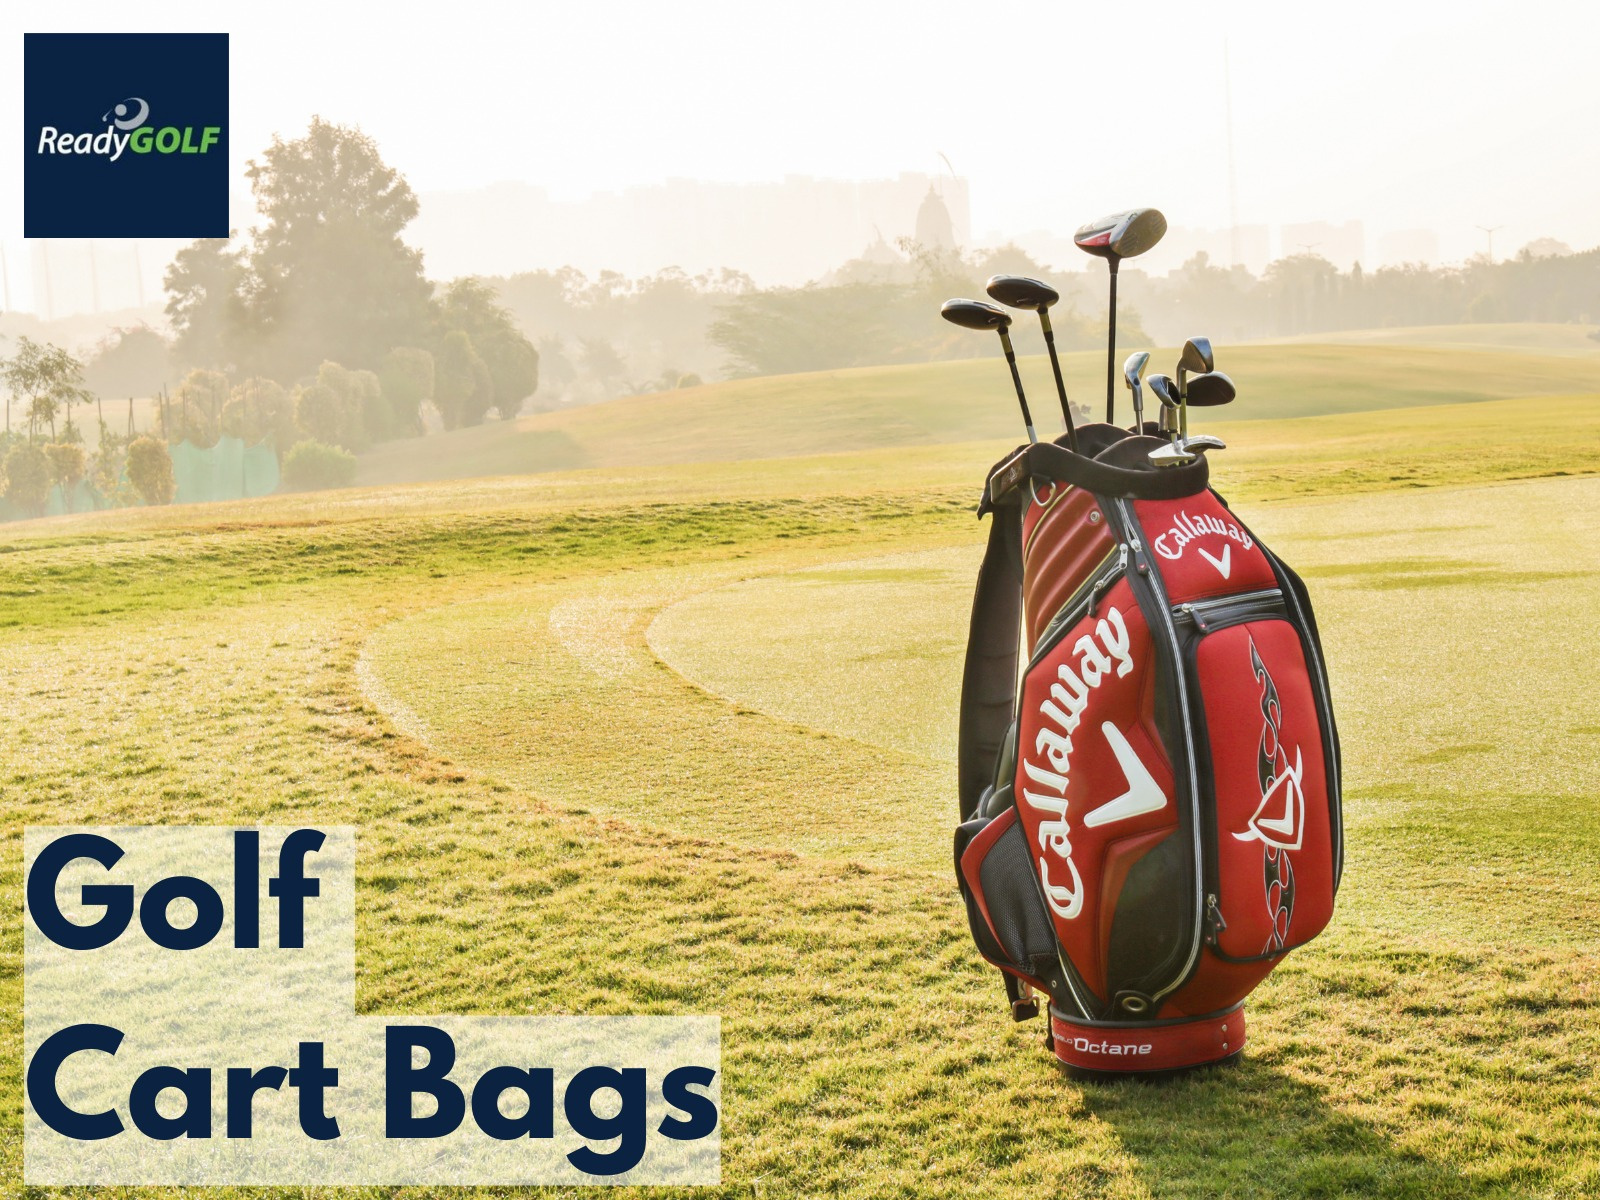 WHERE CAN I FIND THE BEST GOLF BAG SETUP? by ReadyGOLF on Dribbble